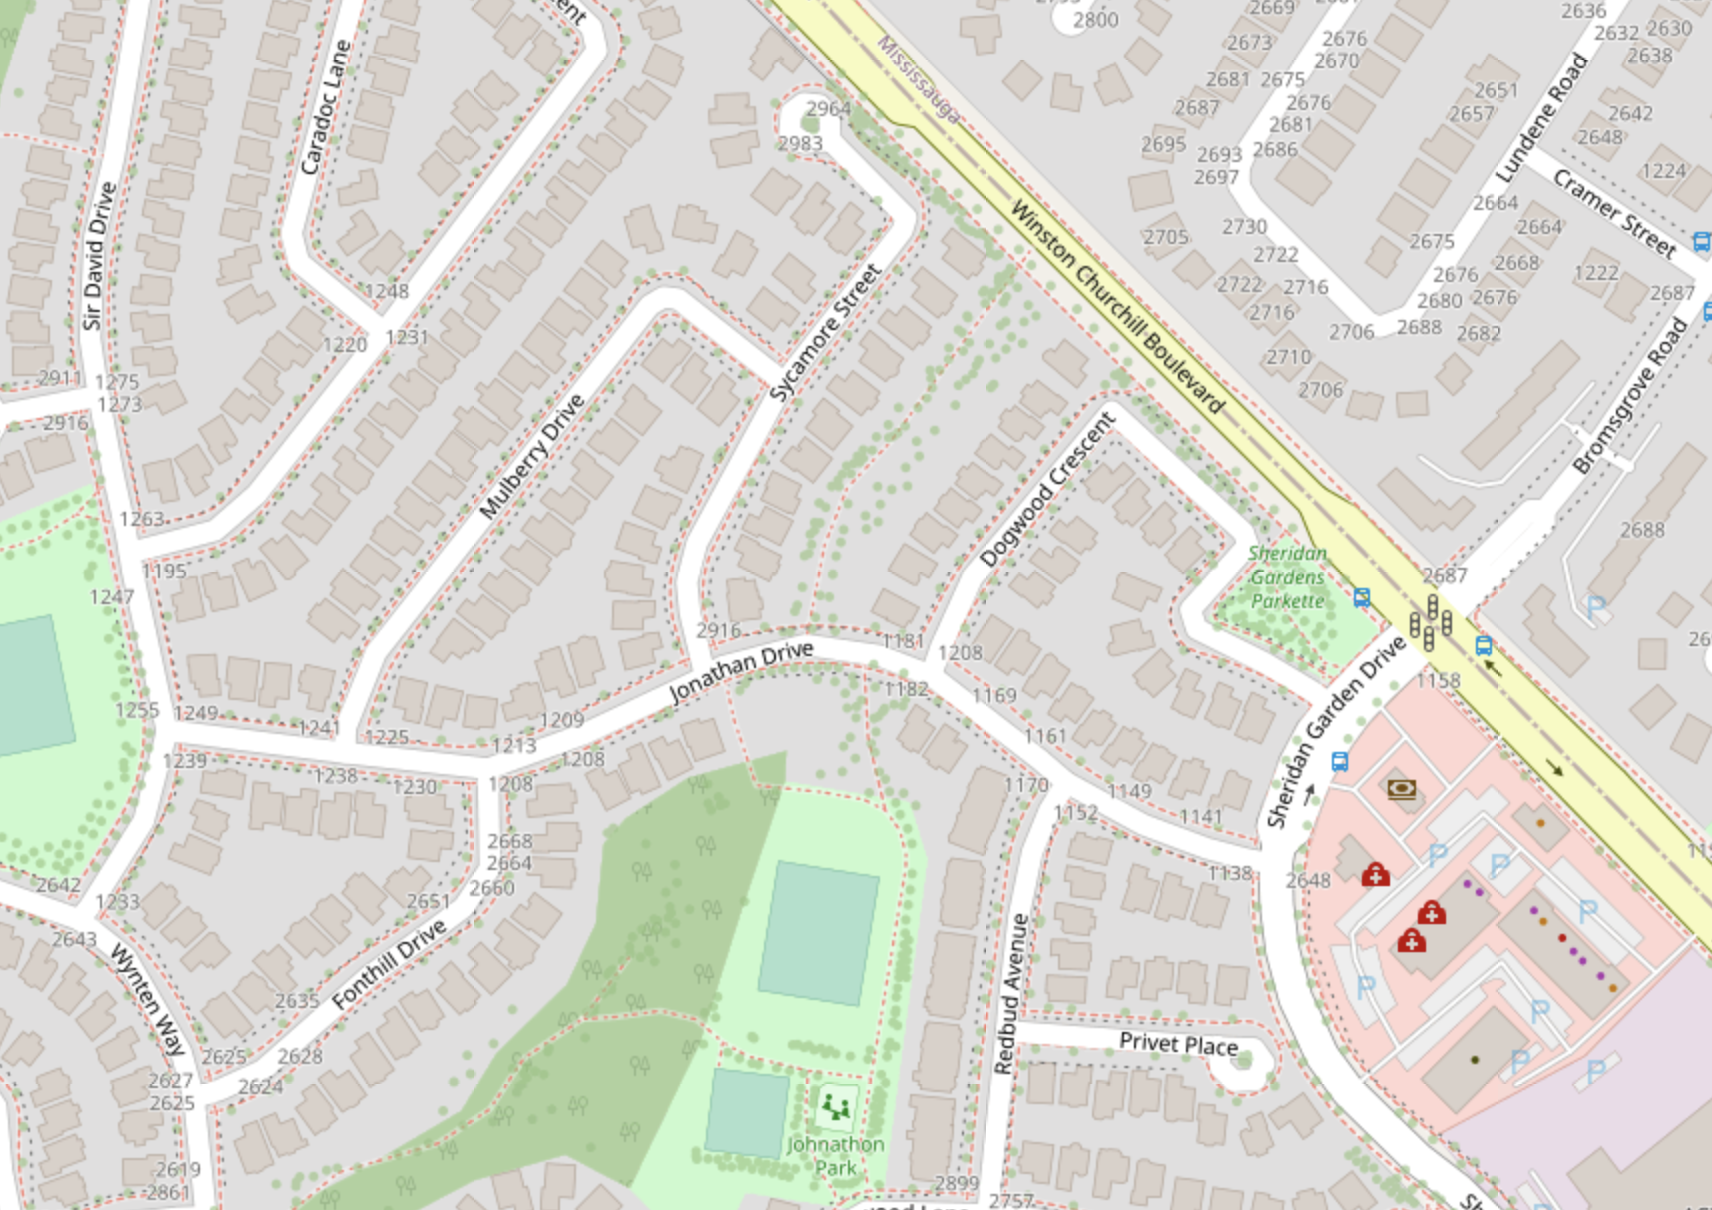 The area of the Mulberry Drive home | Openstreetmap